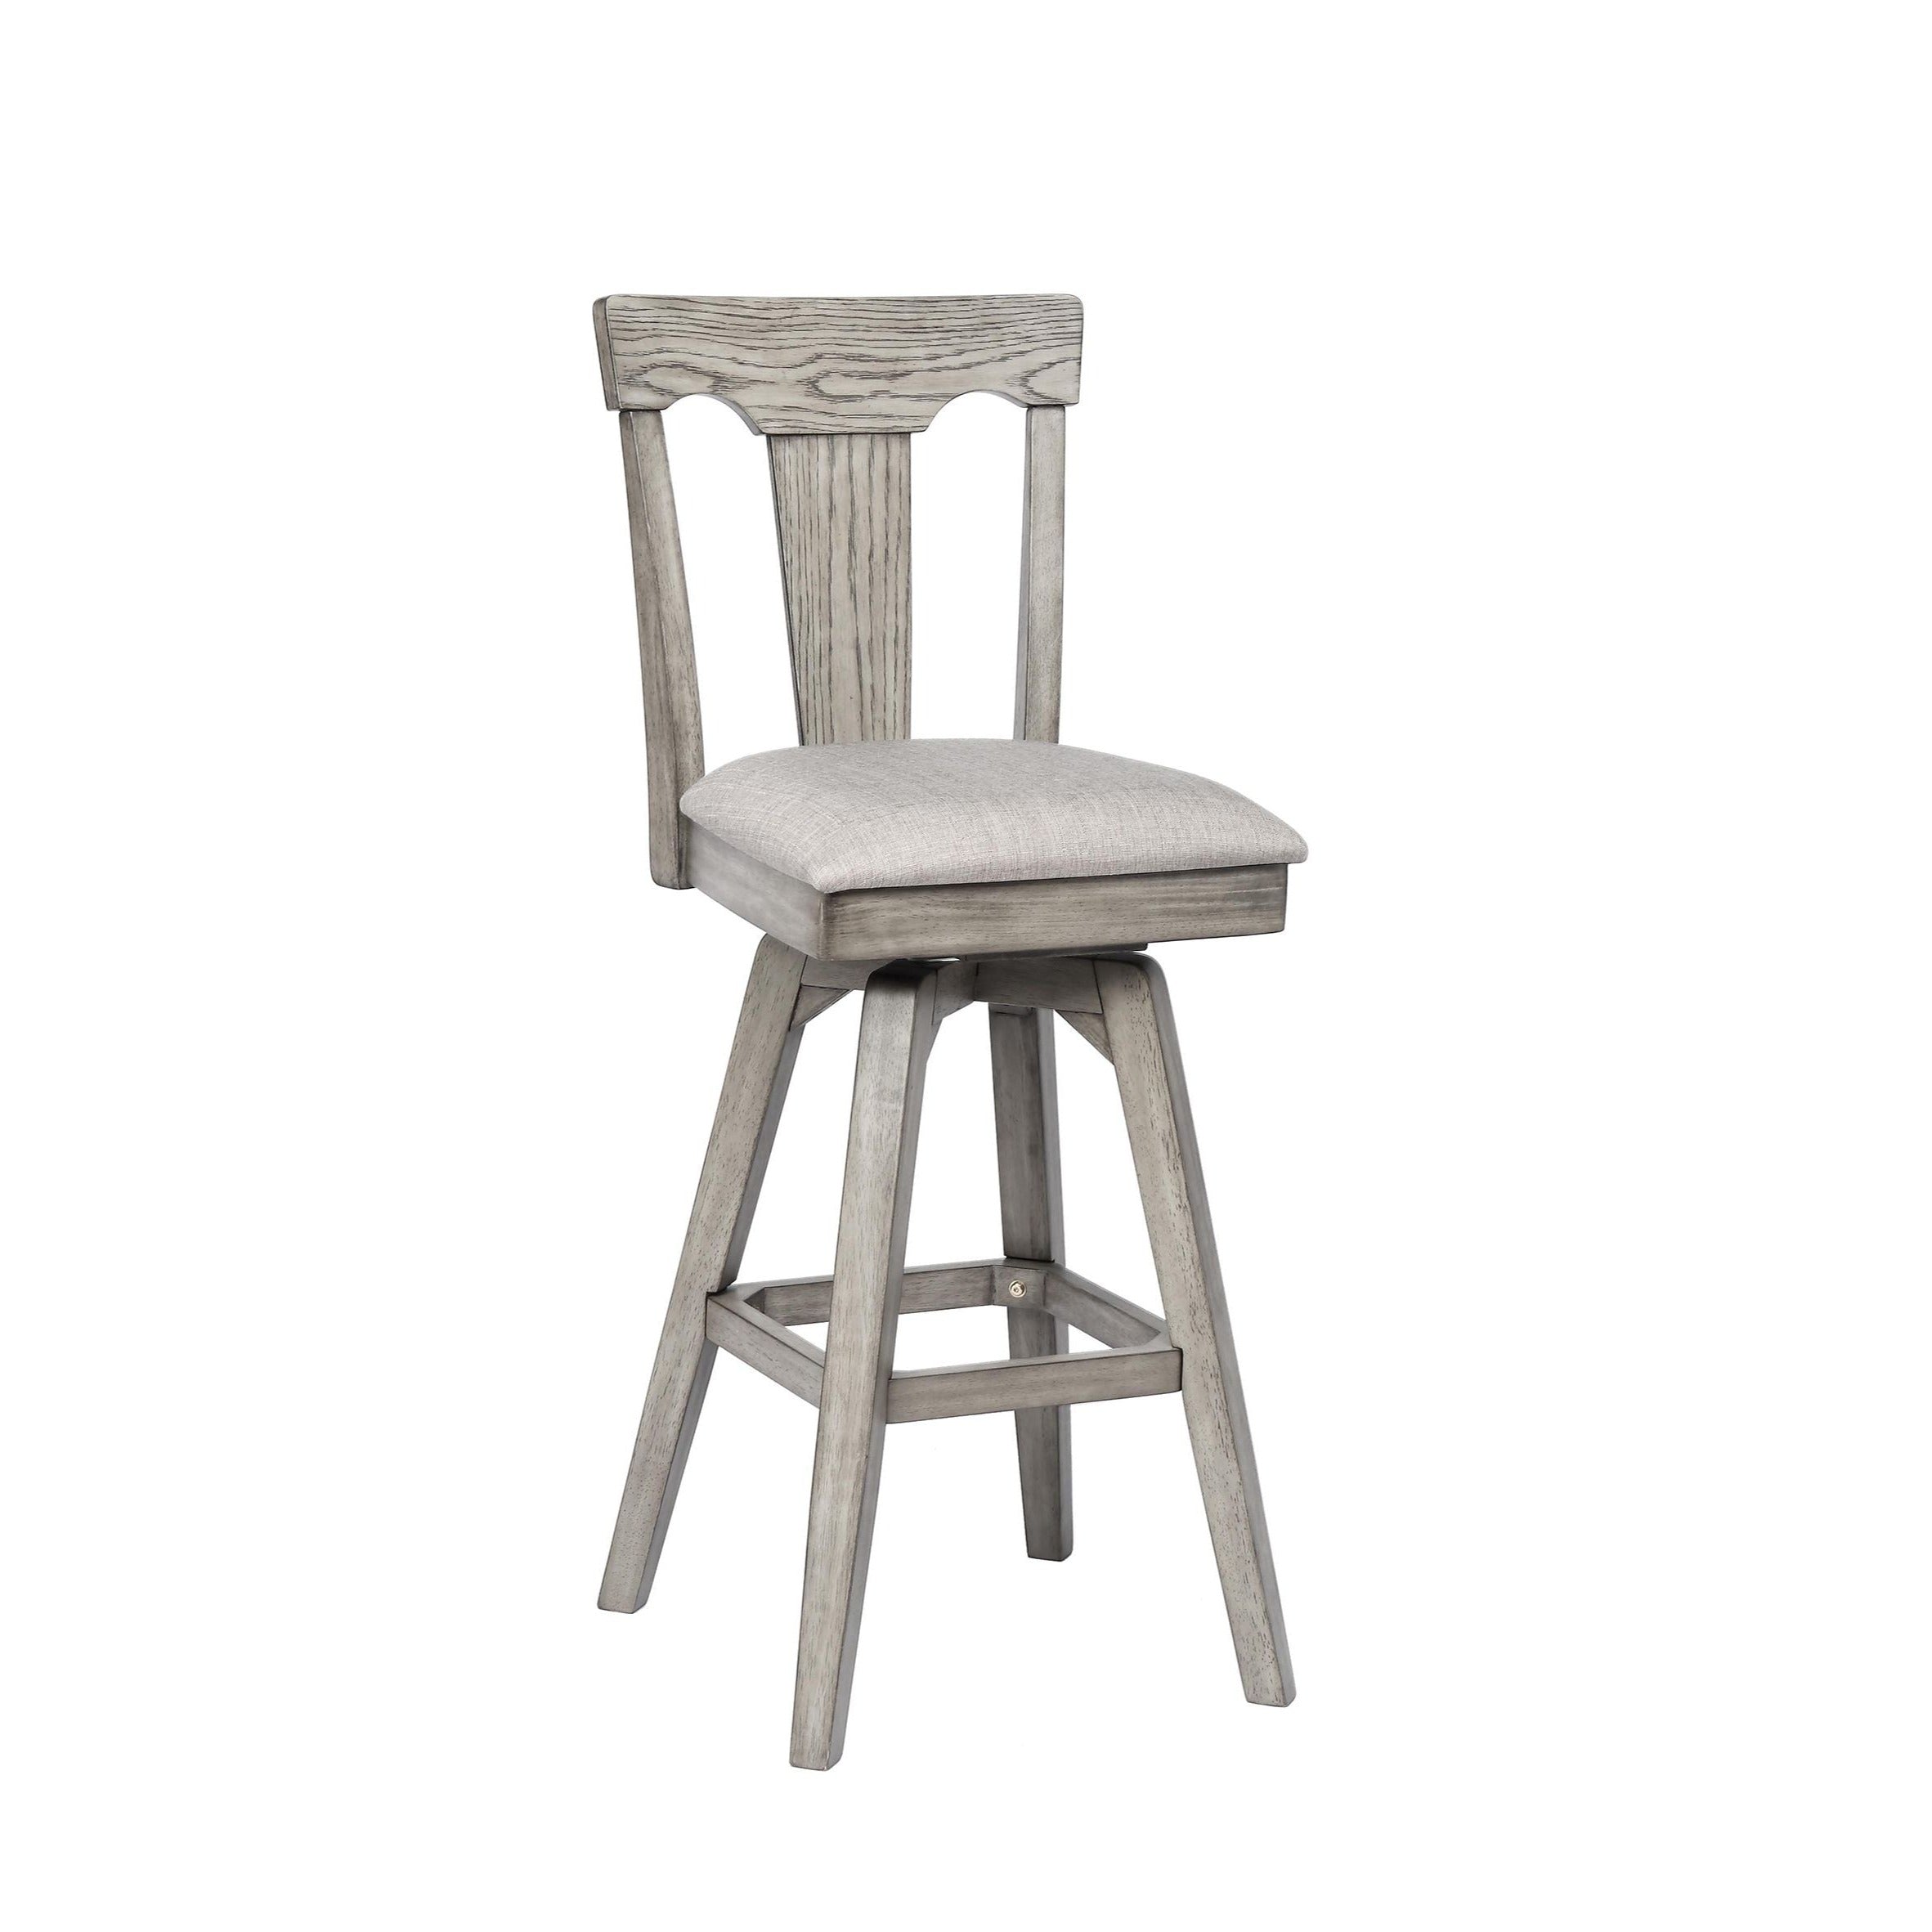 ECI Furniture 30" Panel Back Bar Stool with Upholstered Seat